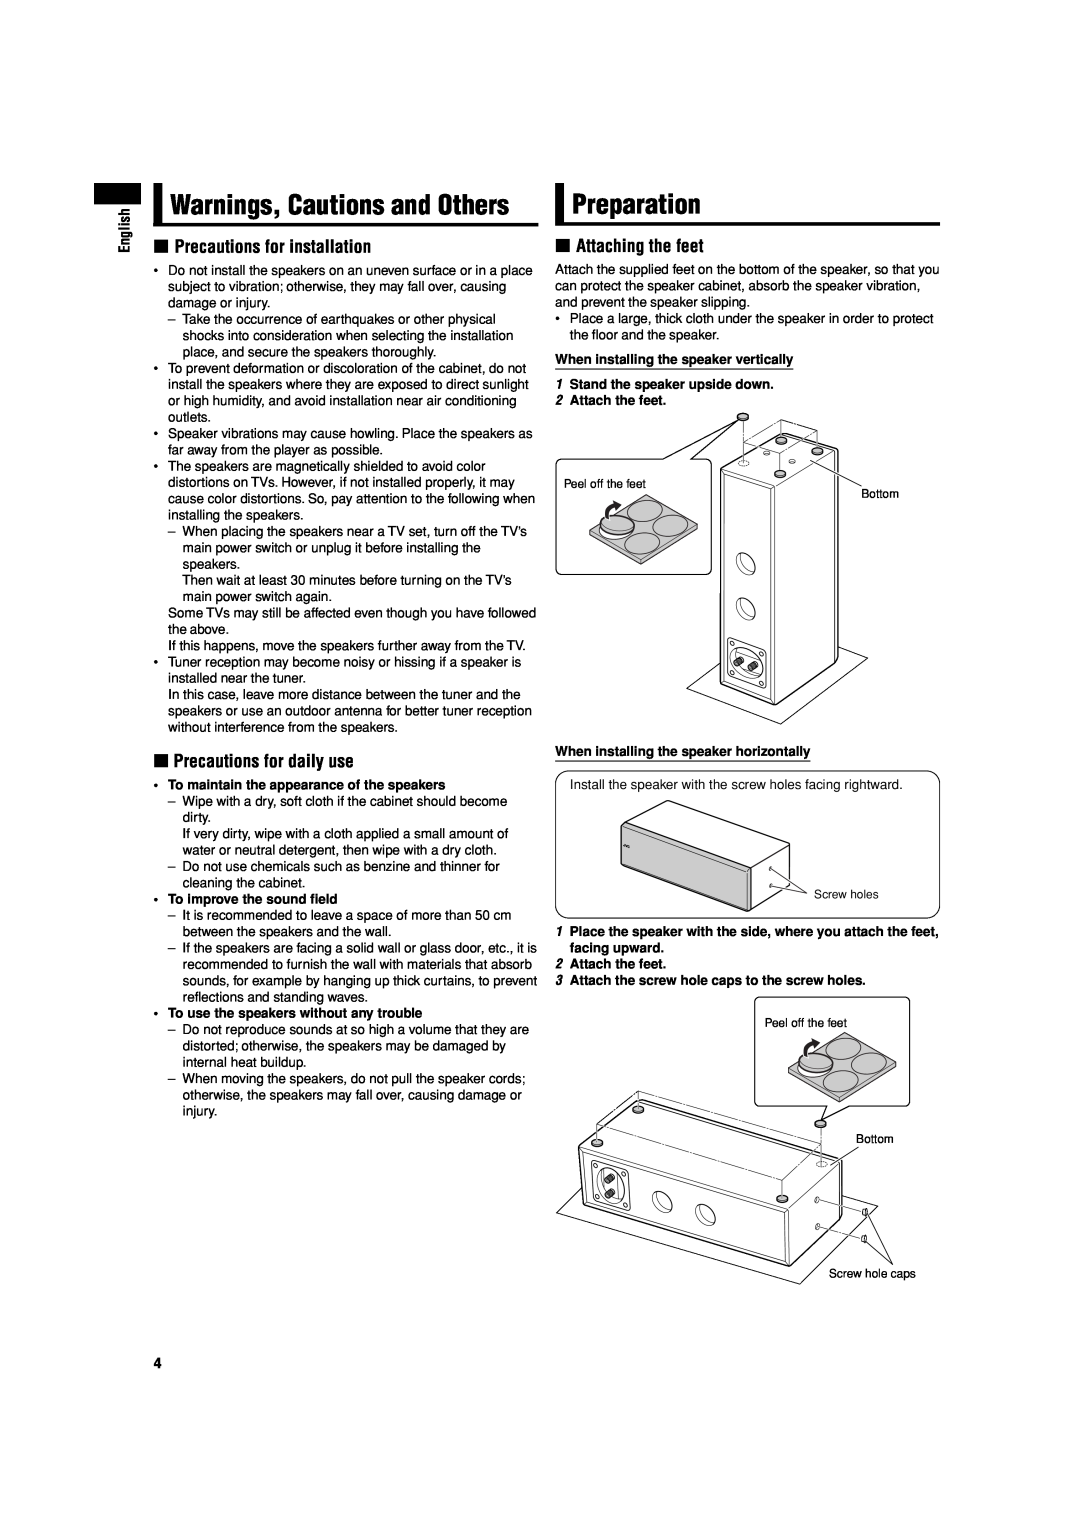 JVC LVT1293-002A Preparation, 7Precautions for installation, 7Precautions for daily use, 7Attaching the feet, English 